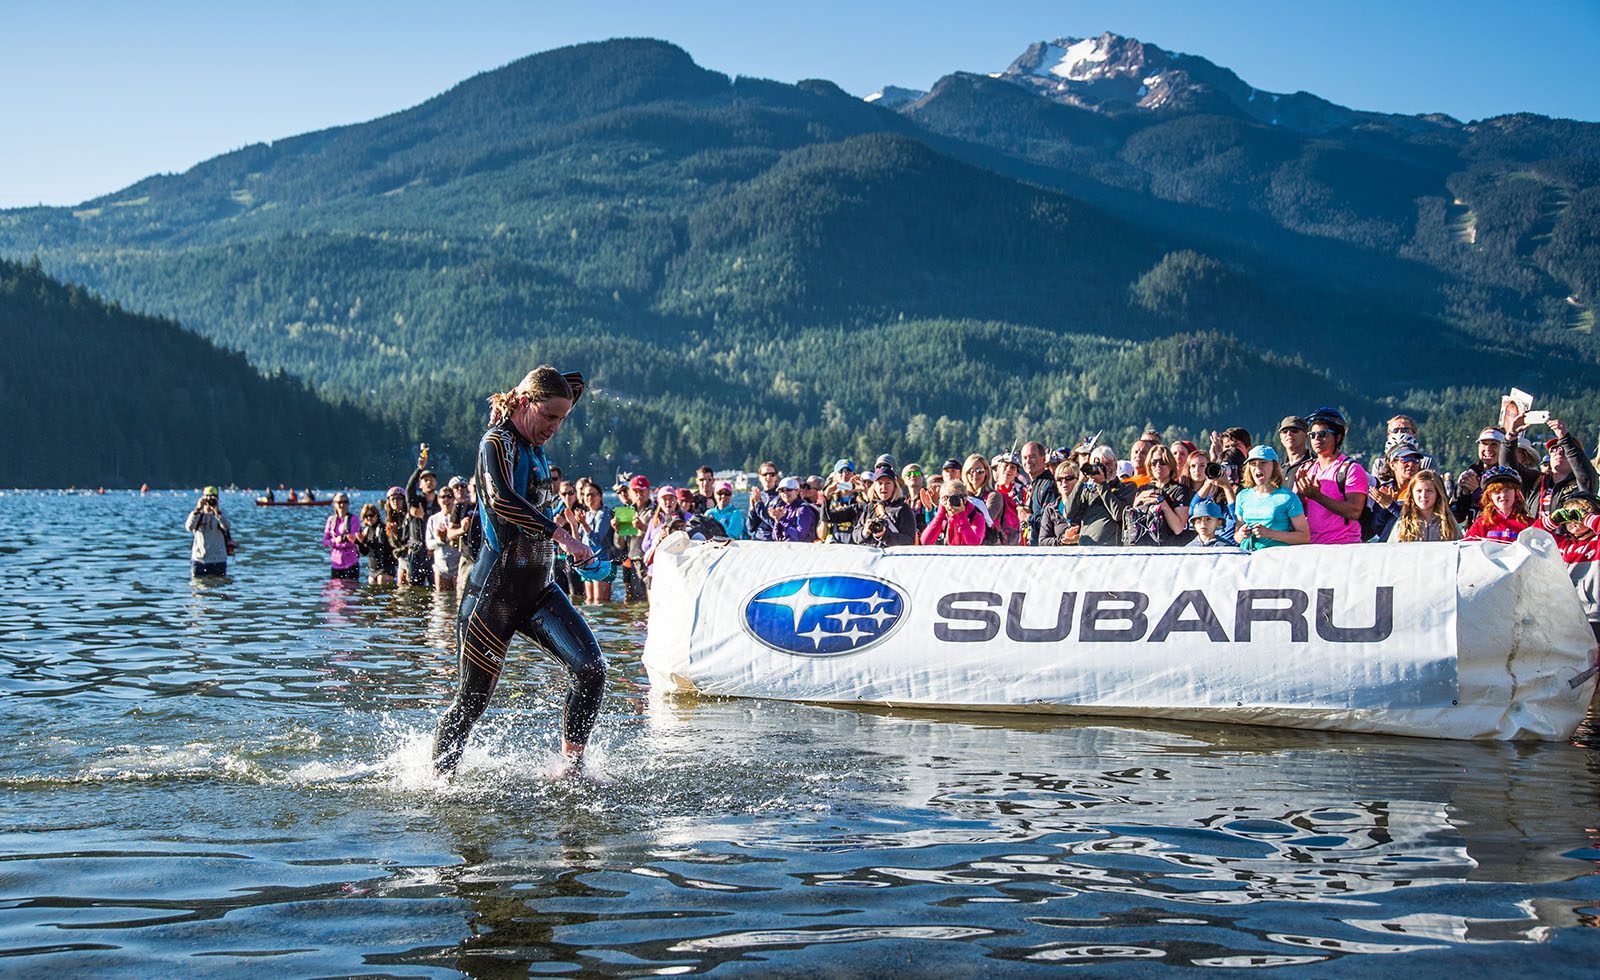 ironman-and-ironman-70-3-canada-recipients-of-2016-athlete-s-choice